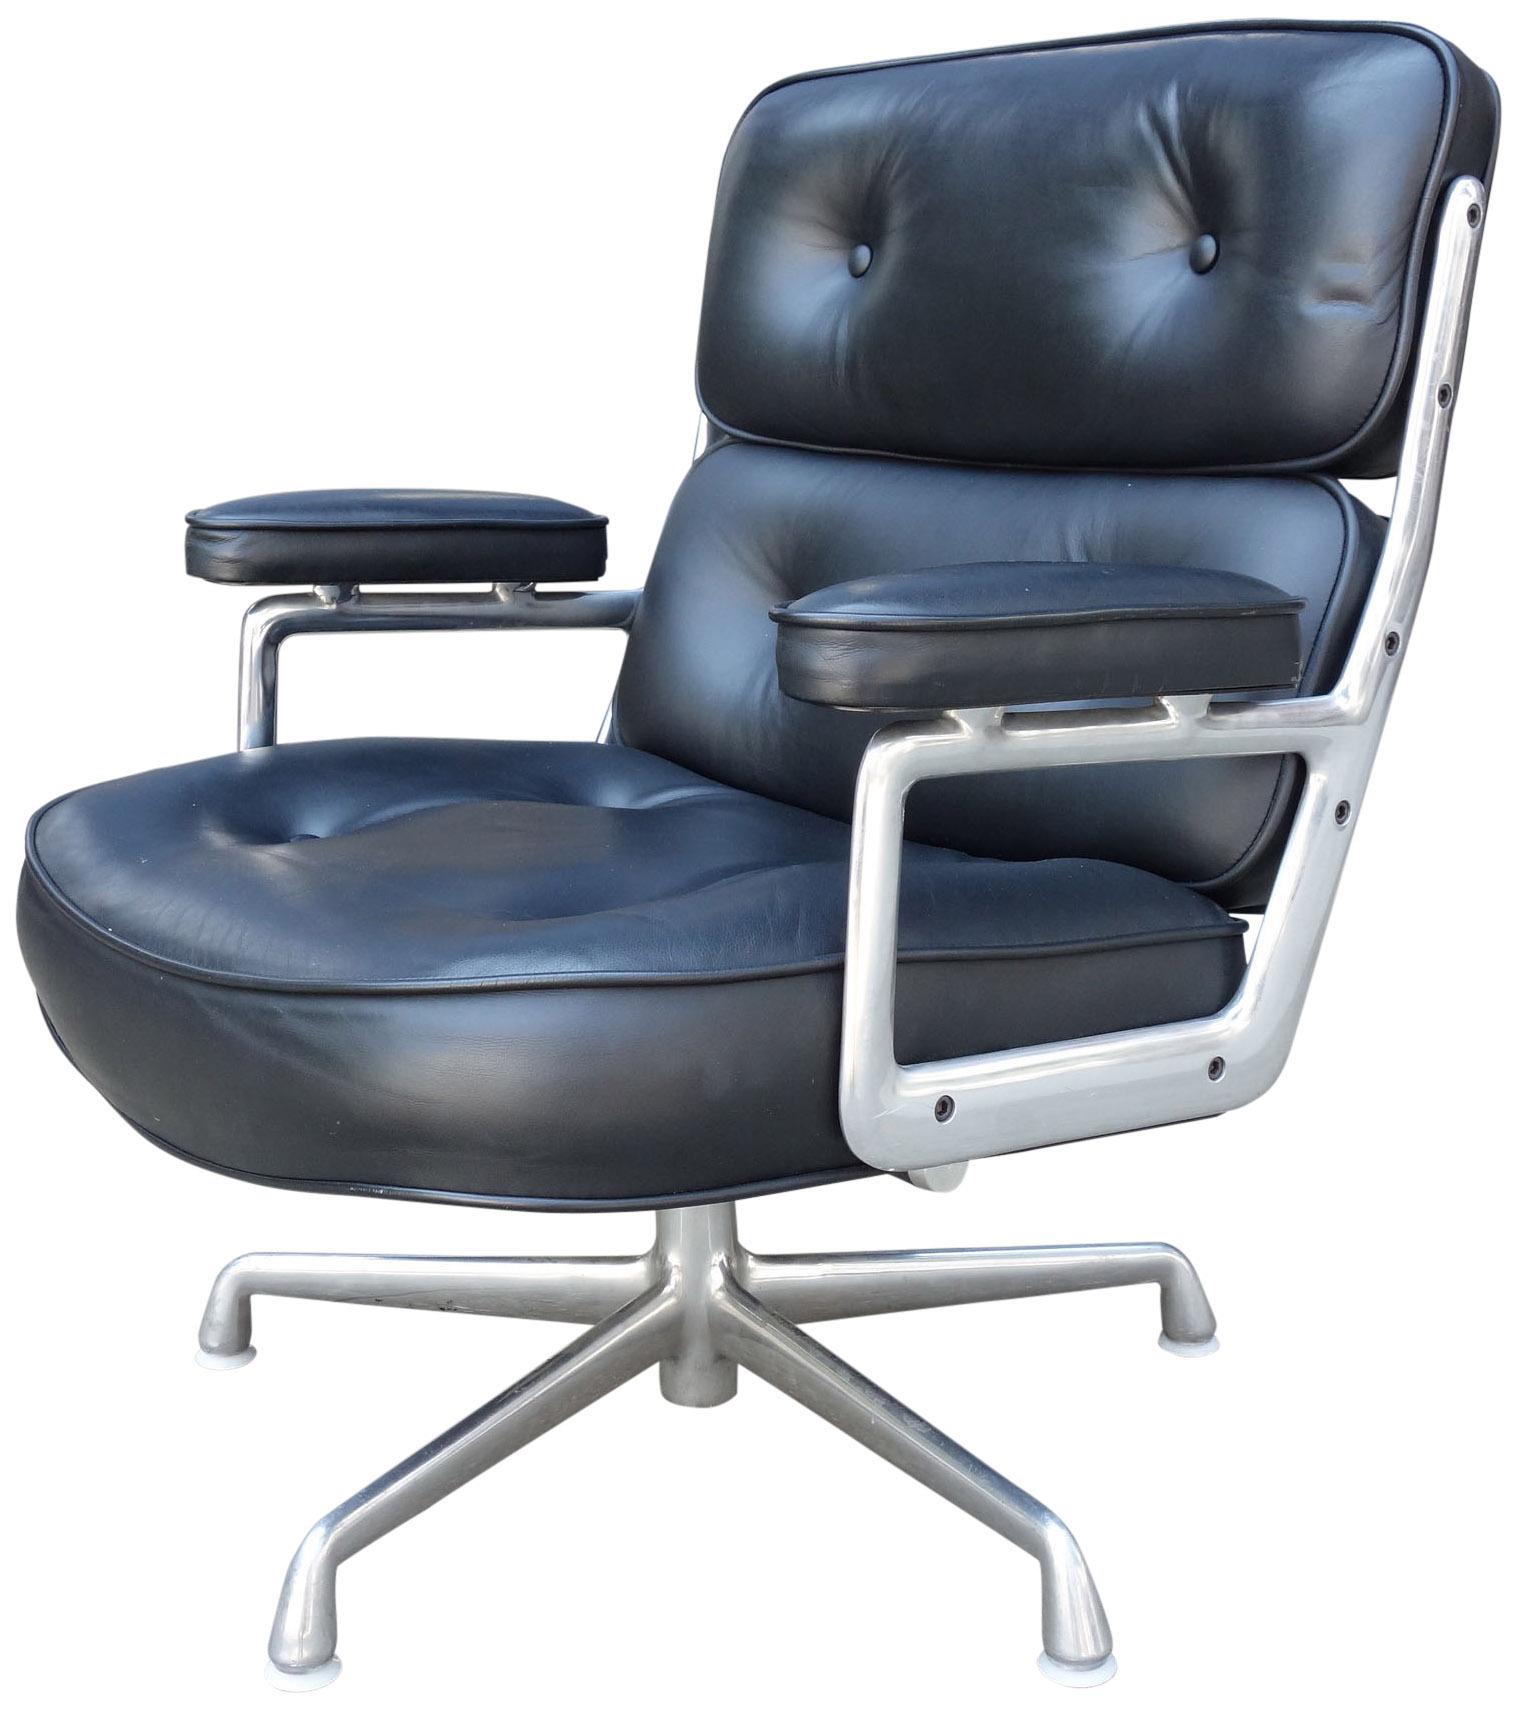 Eames designed chairs for New York's Time-Life Building in the late 1950s. These examples are from the late 1990s. Different then the aluminum group or soft pad chairs, this chair is the most luxurious executive chair available. A perfect